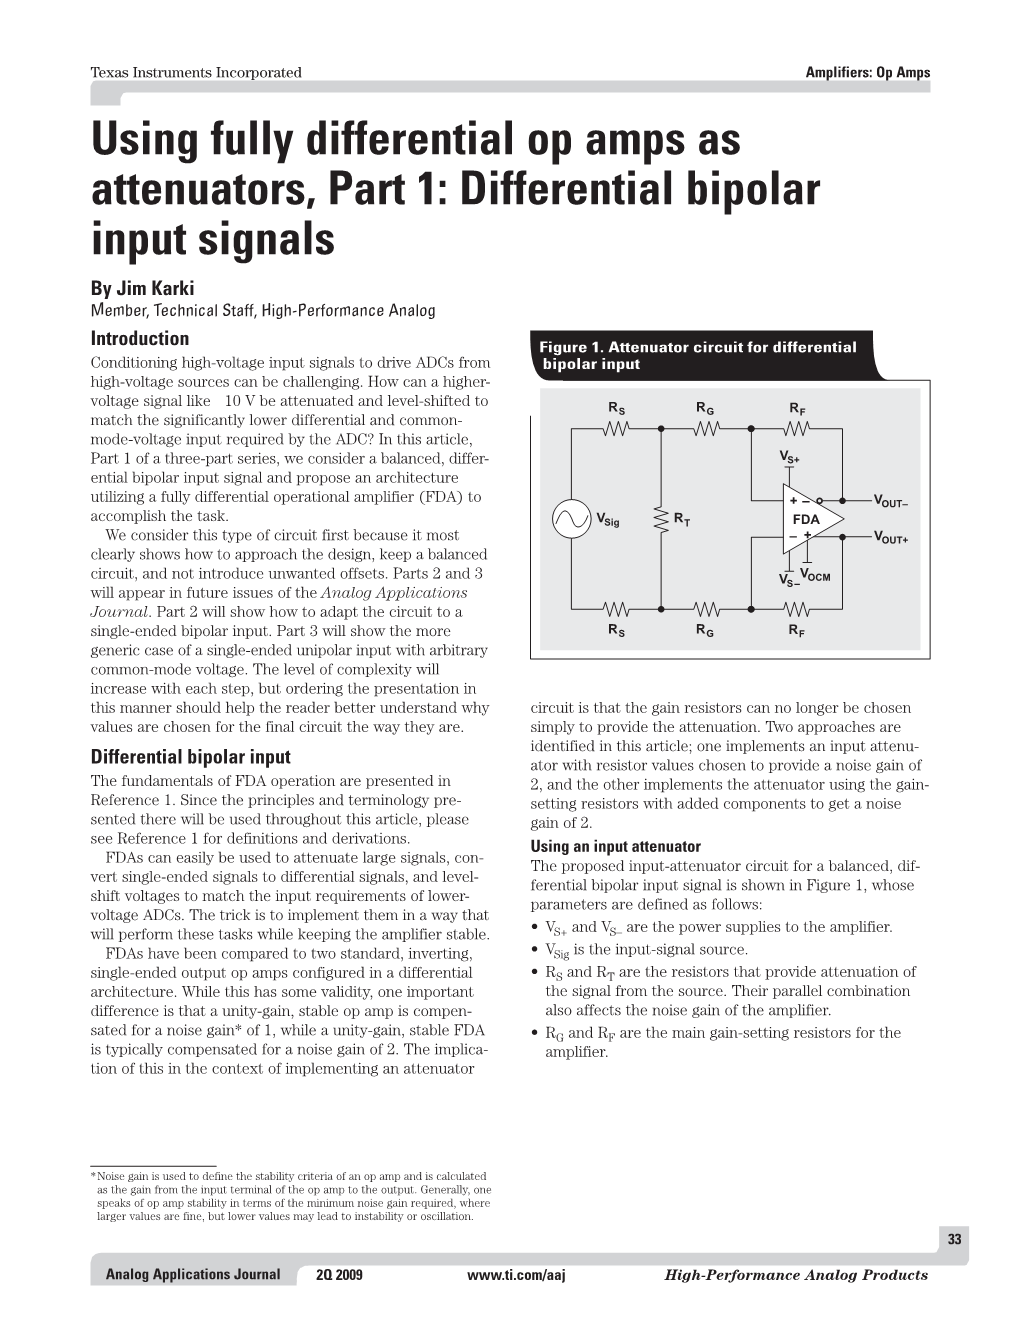 Using Fully Differential Op Amps As Attenuators, Part 1: Differential Bipolar Input Signals by Jim Karki Member, Technical Staff, High-Performance Analog